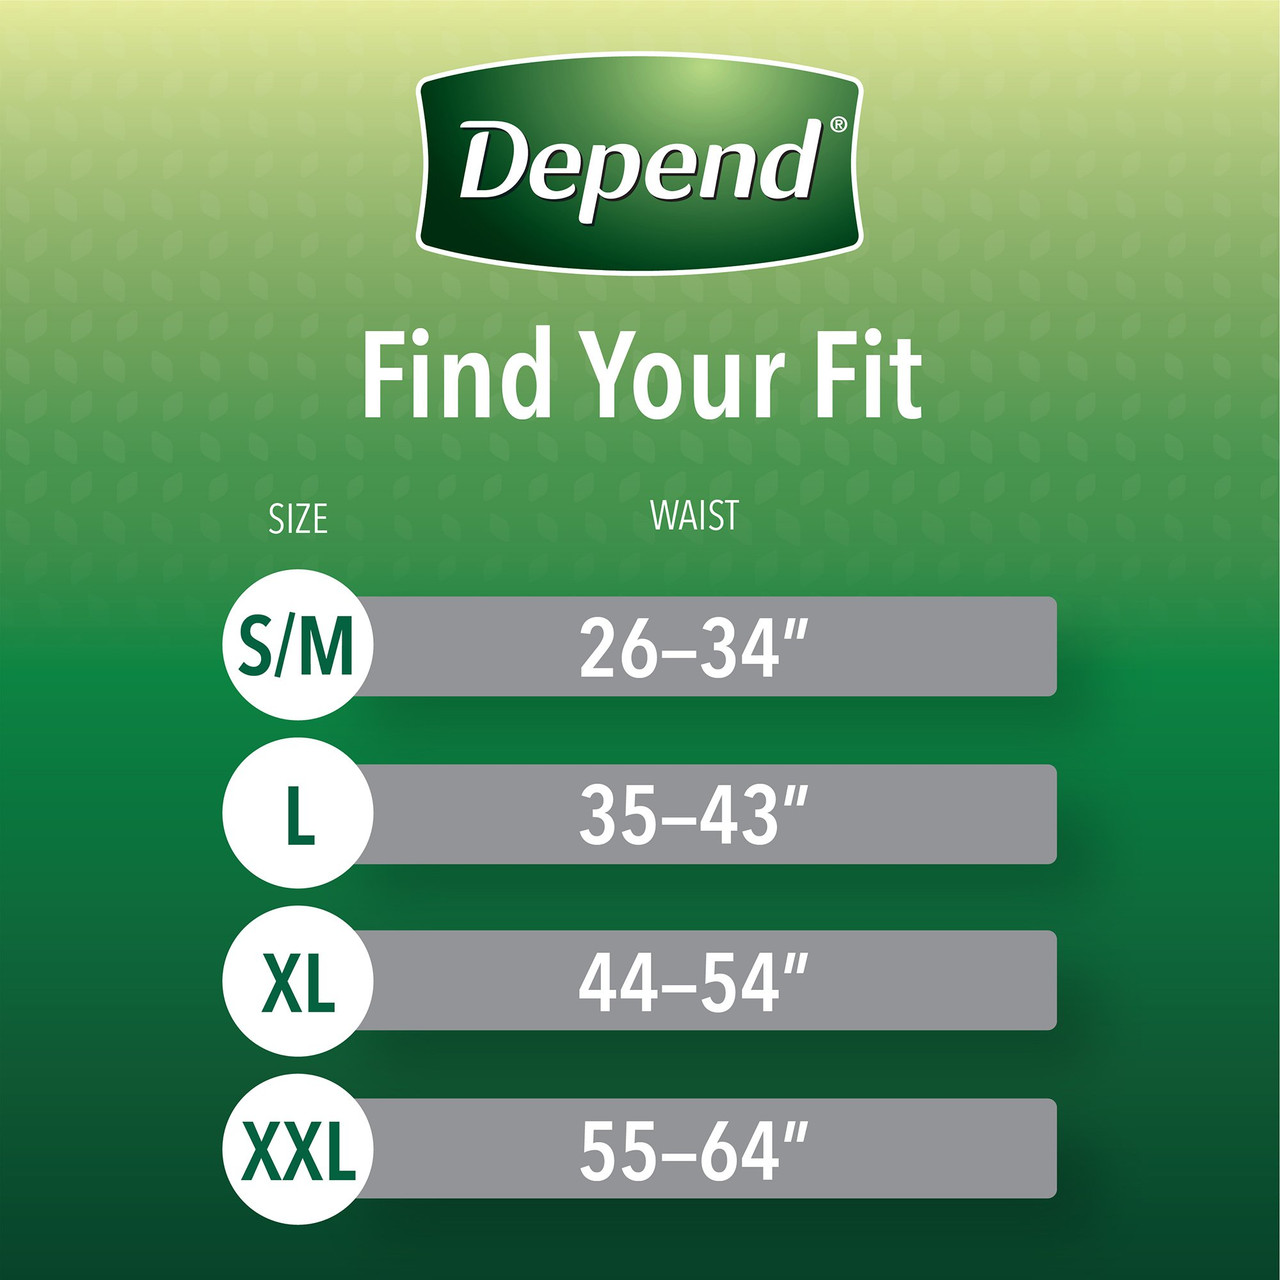 Depend Fresh Protection Incontinence Underwear for Men, Maximum Absorbency  - Simply Medical